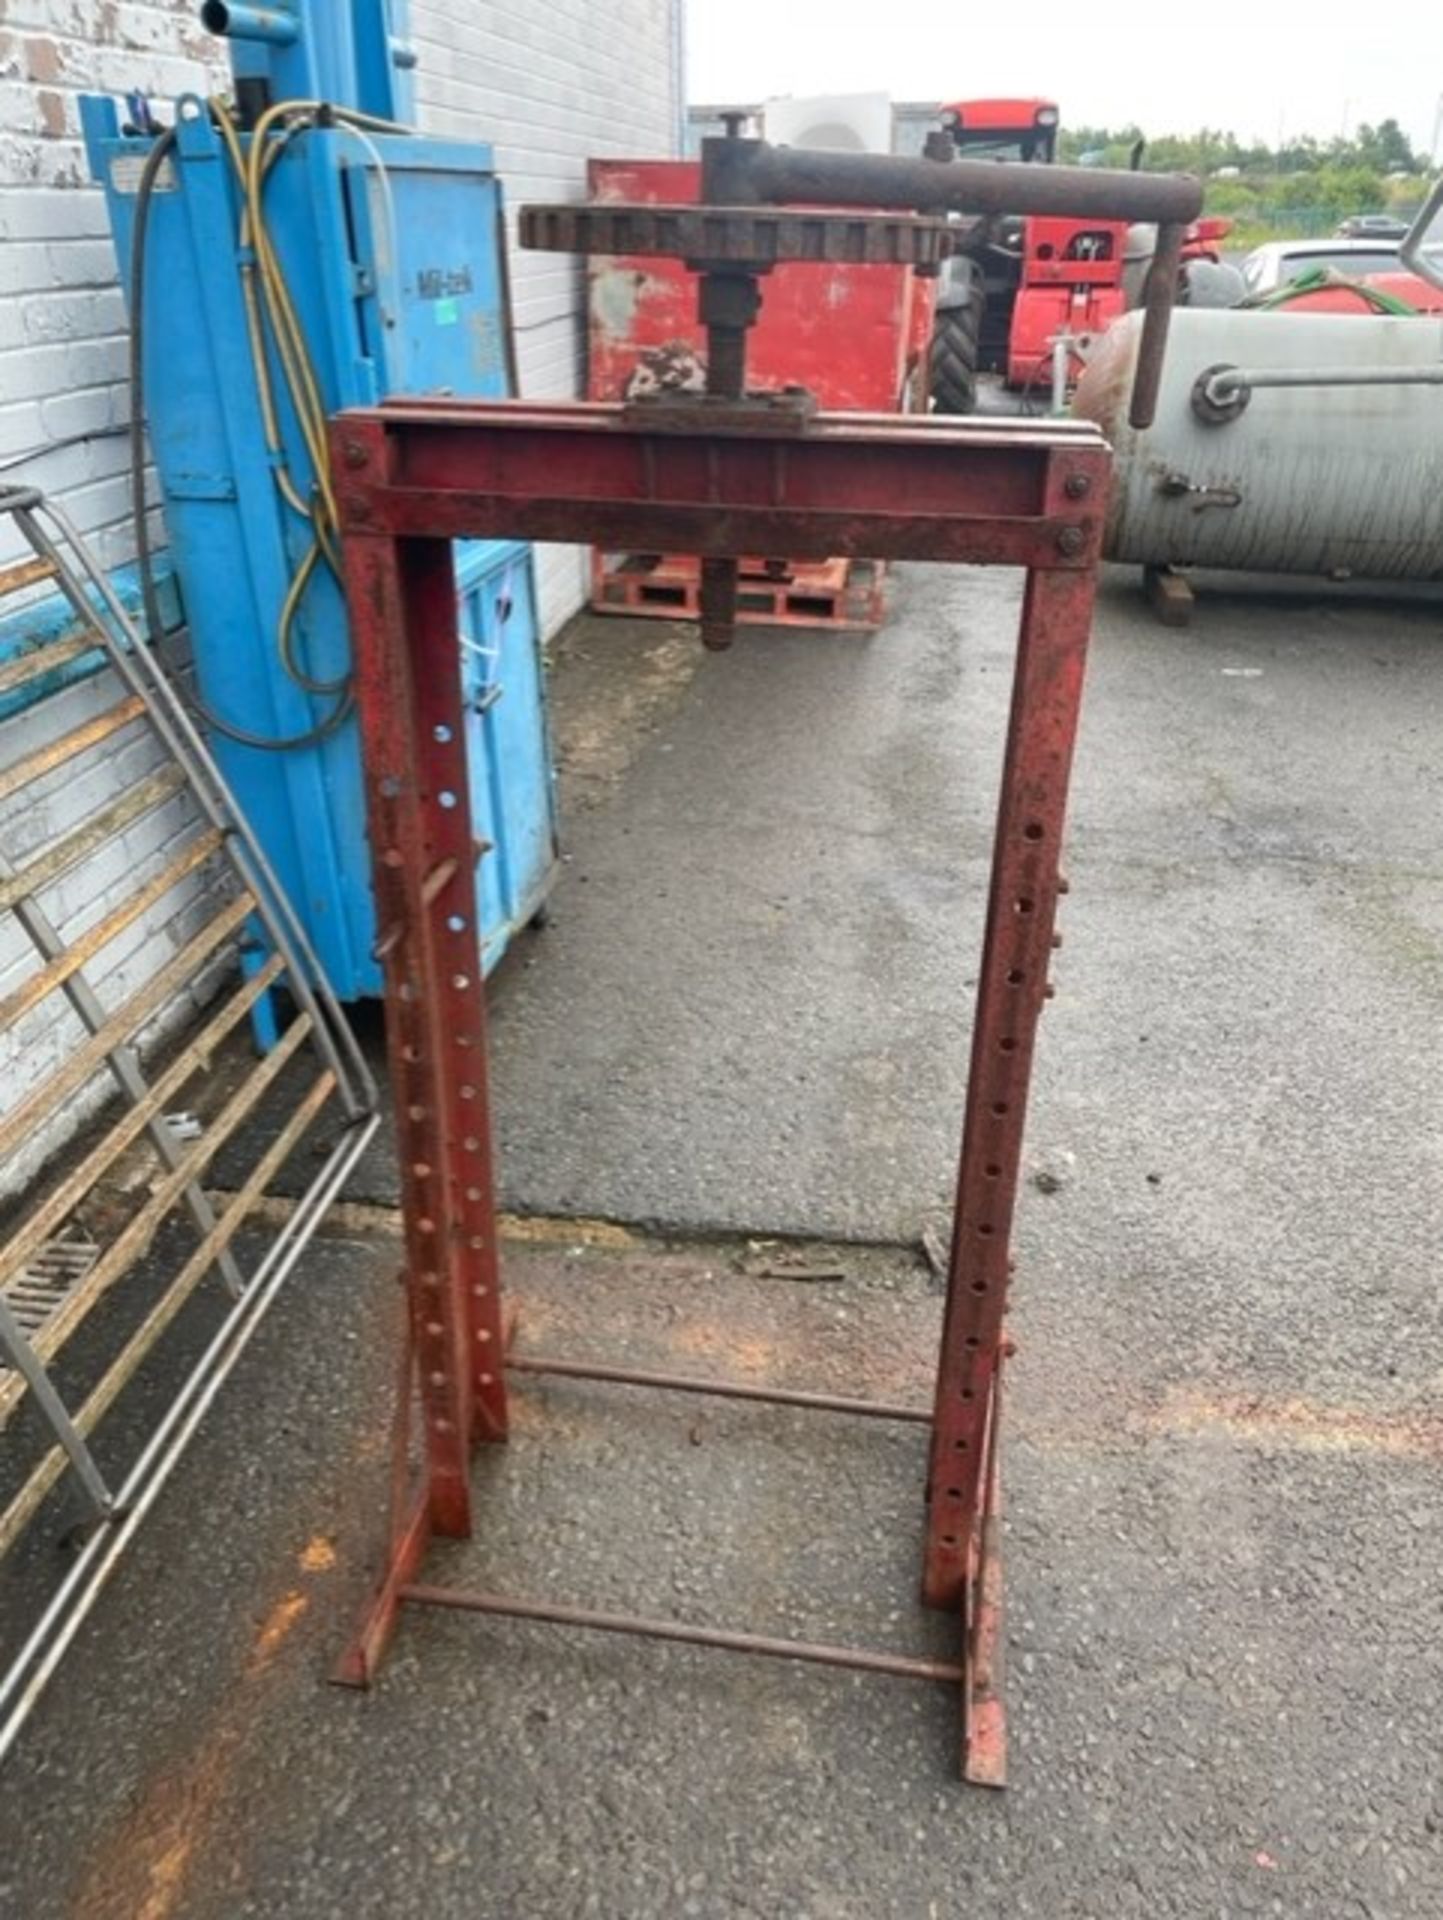 Old 10 ton press has the bottom plate missing